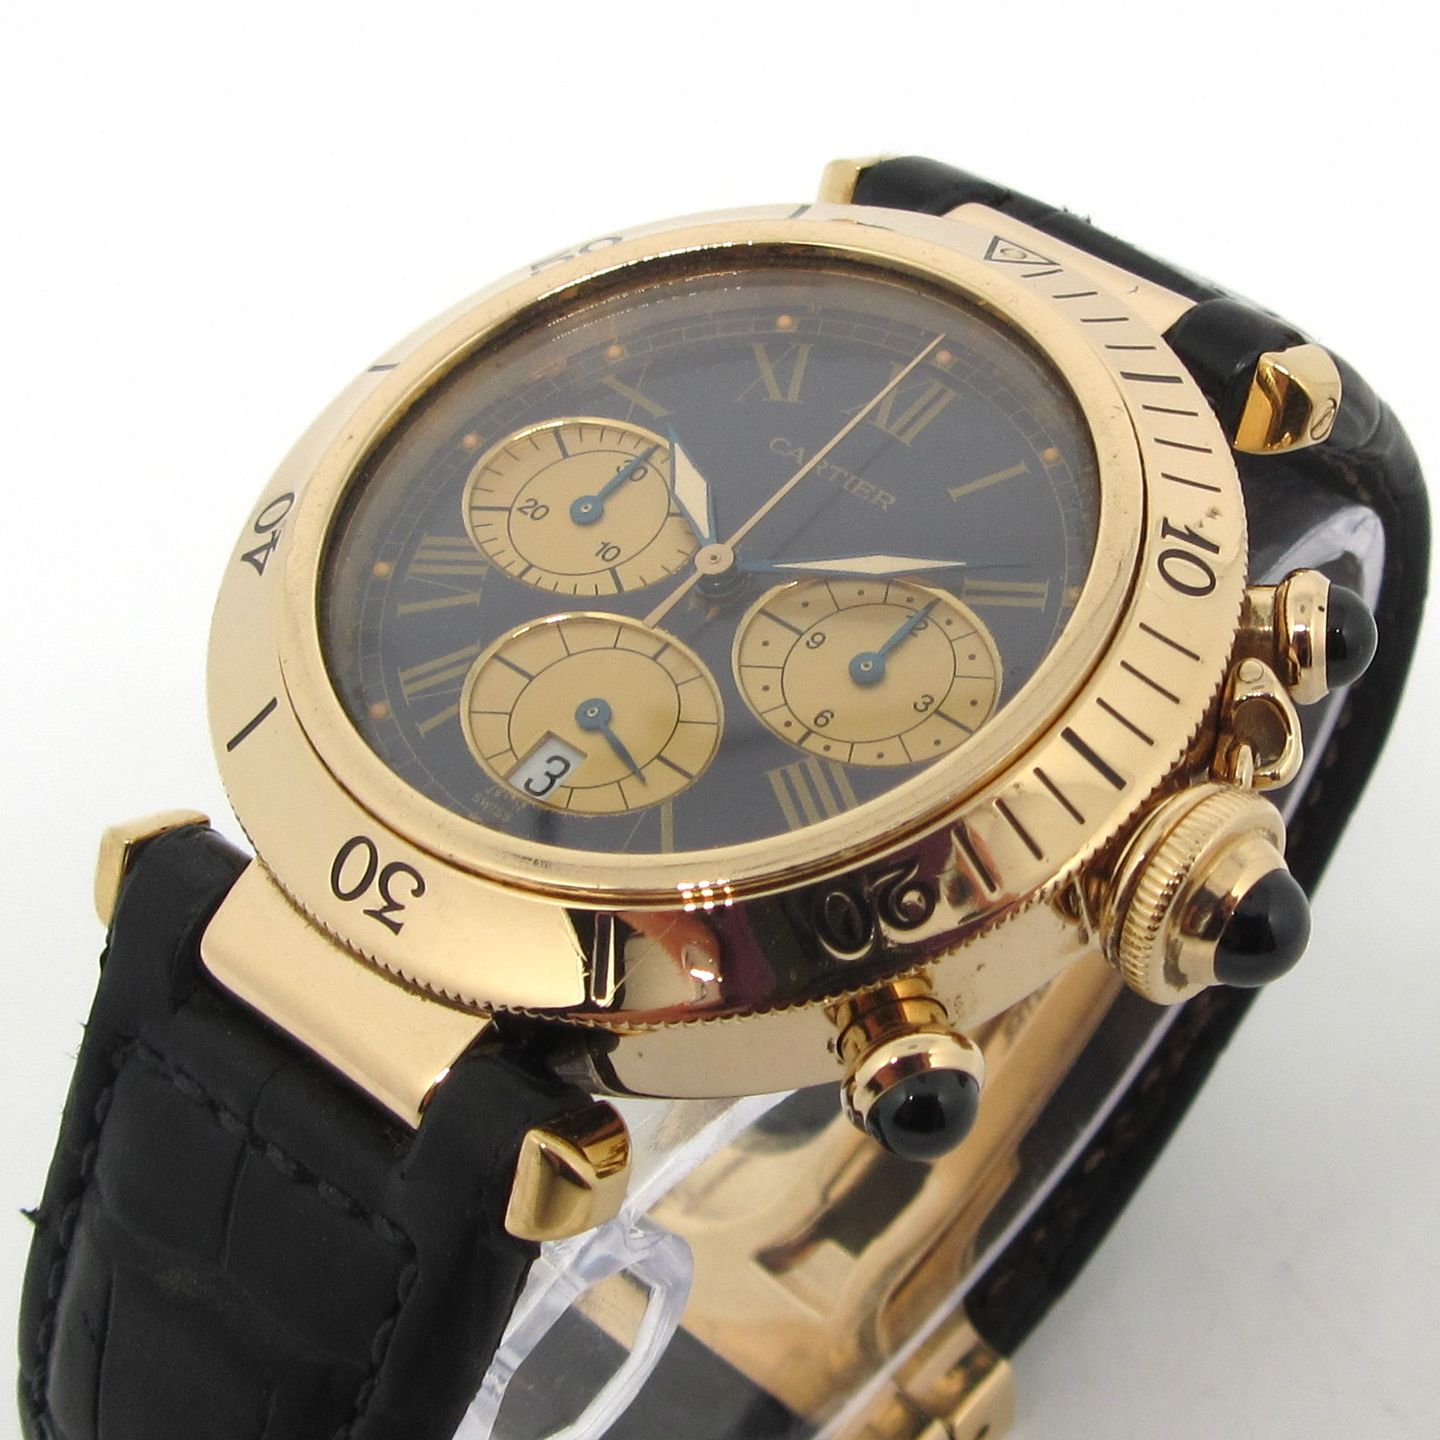 Cartier Pasha C 0960 1 (Unknown (random serial)) - Black dial 38 mm Yellow Gold case (1/5)